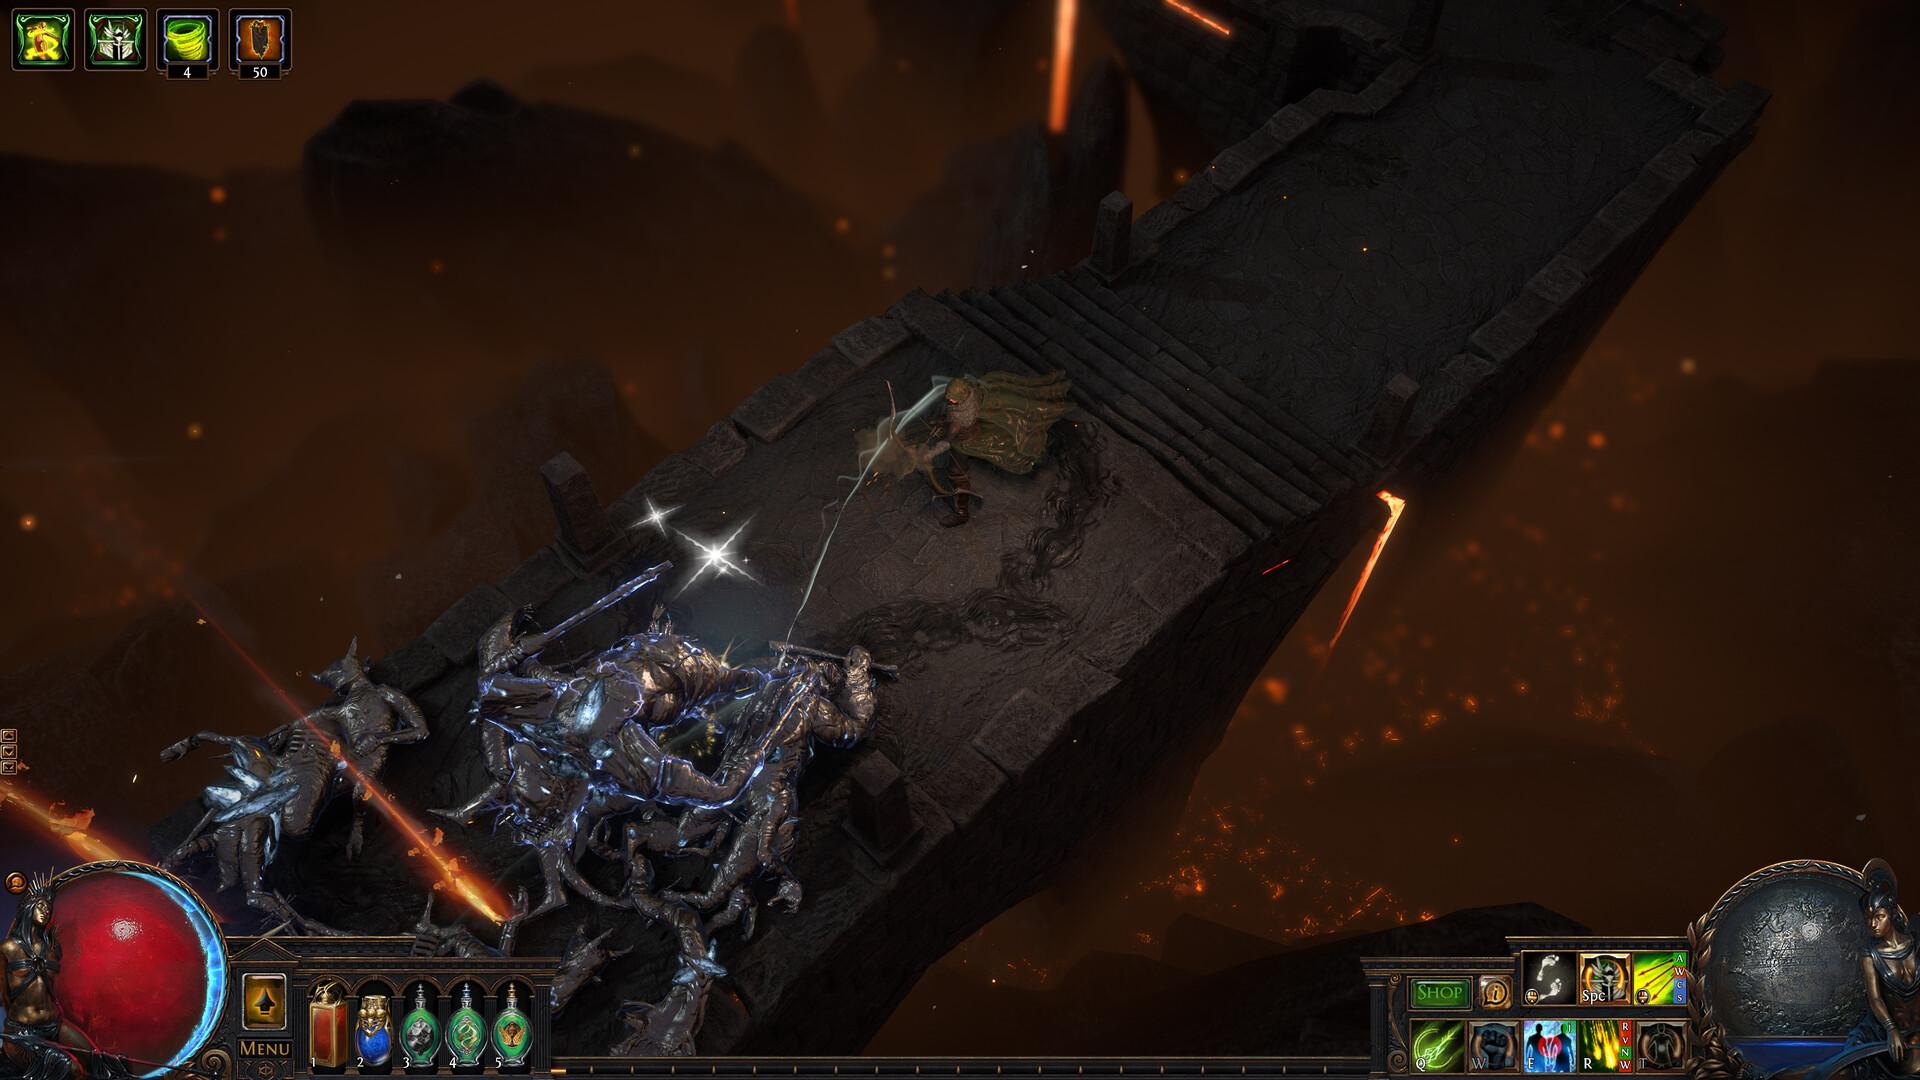 Screenshot №2 from game Path of Exile